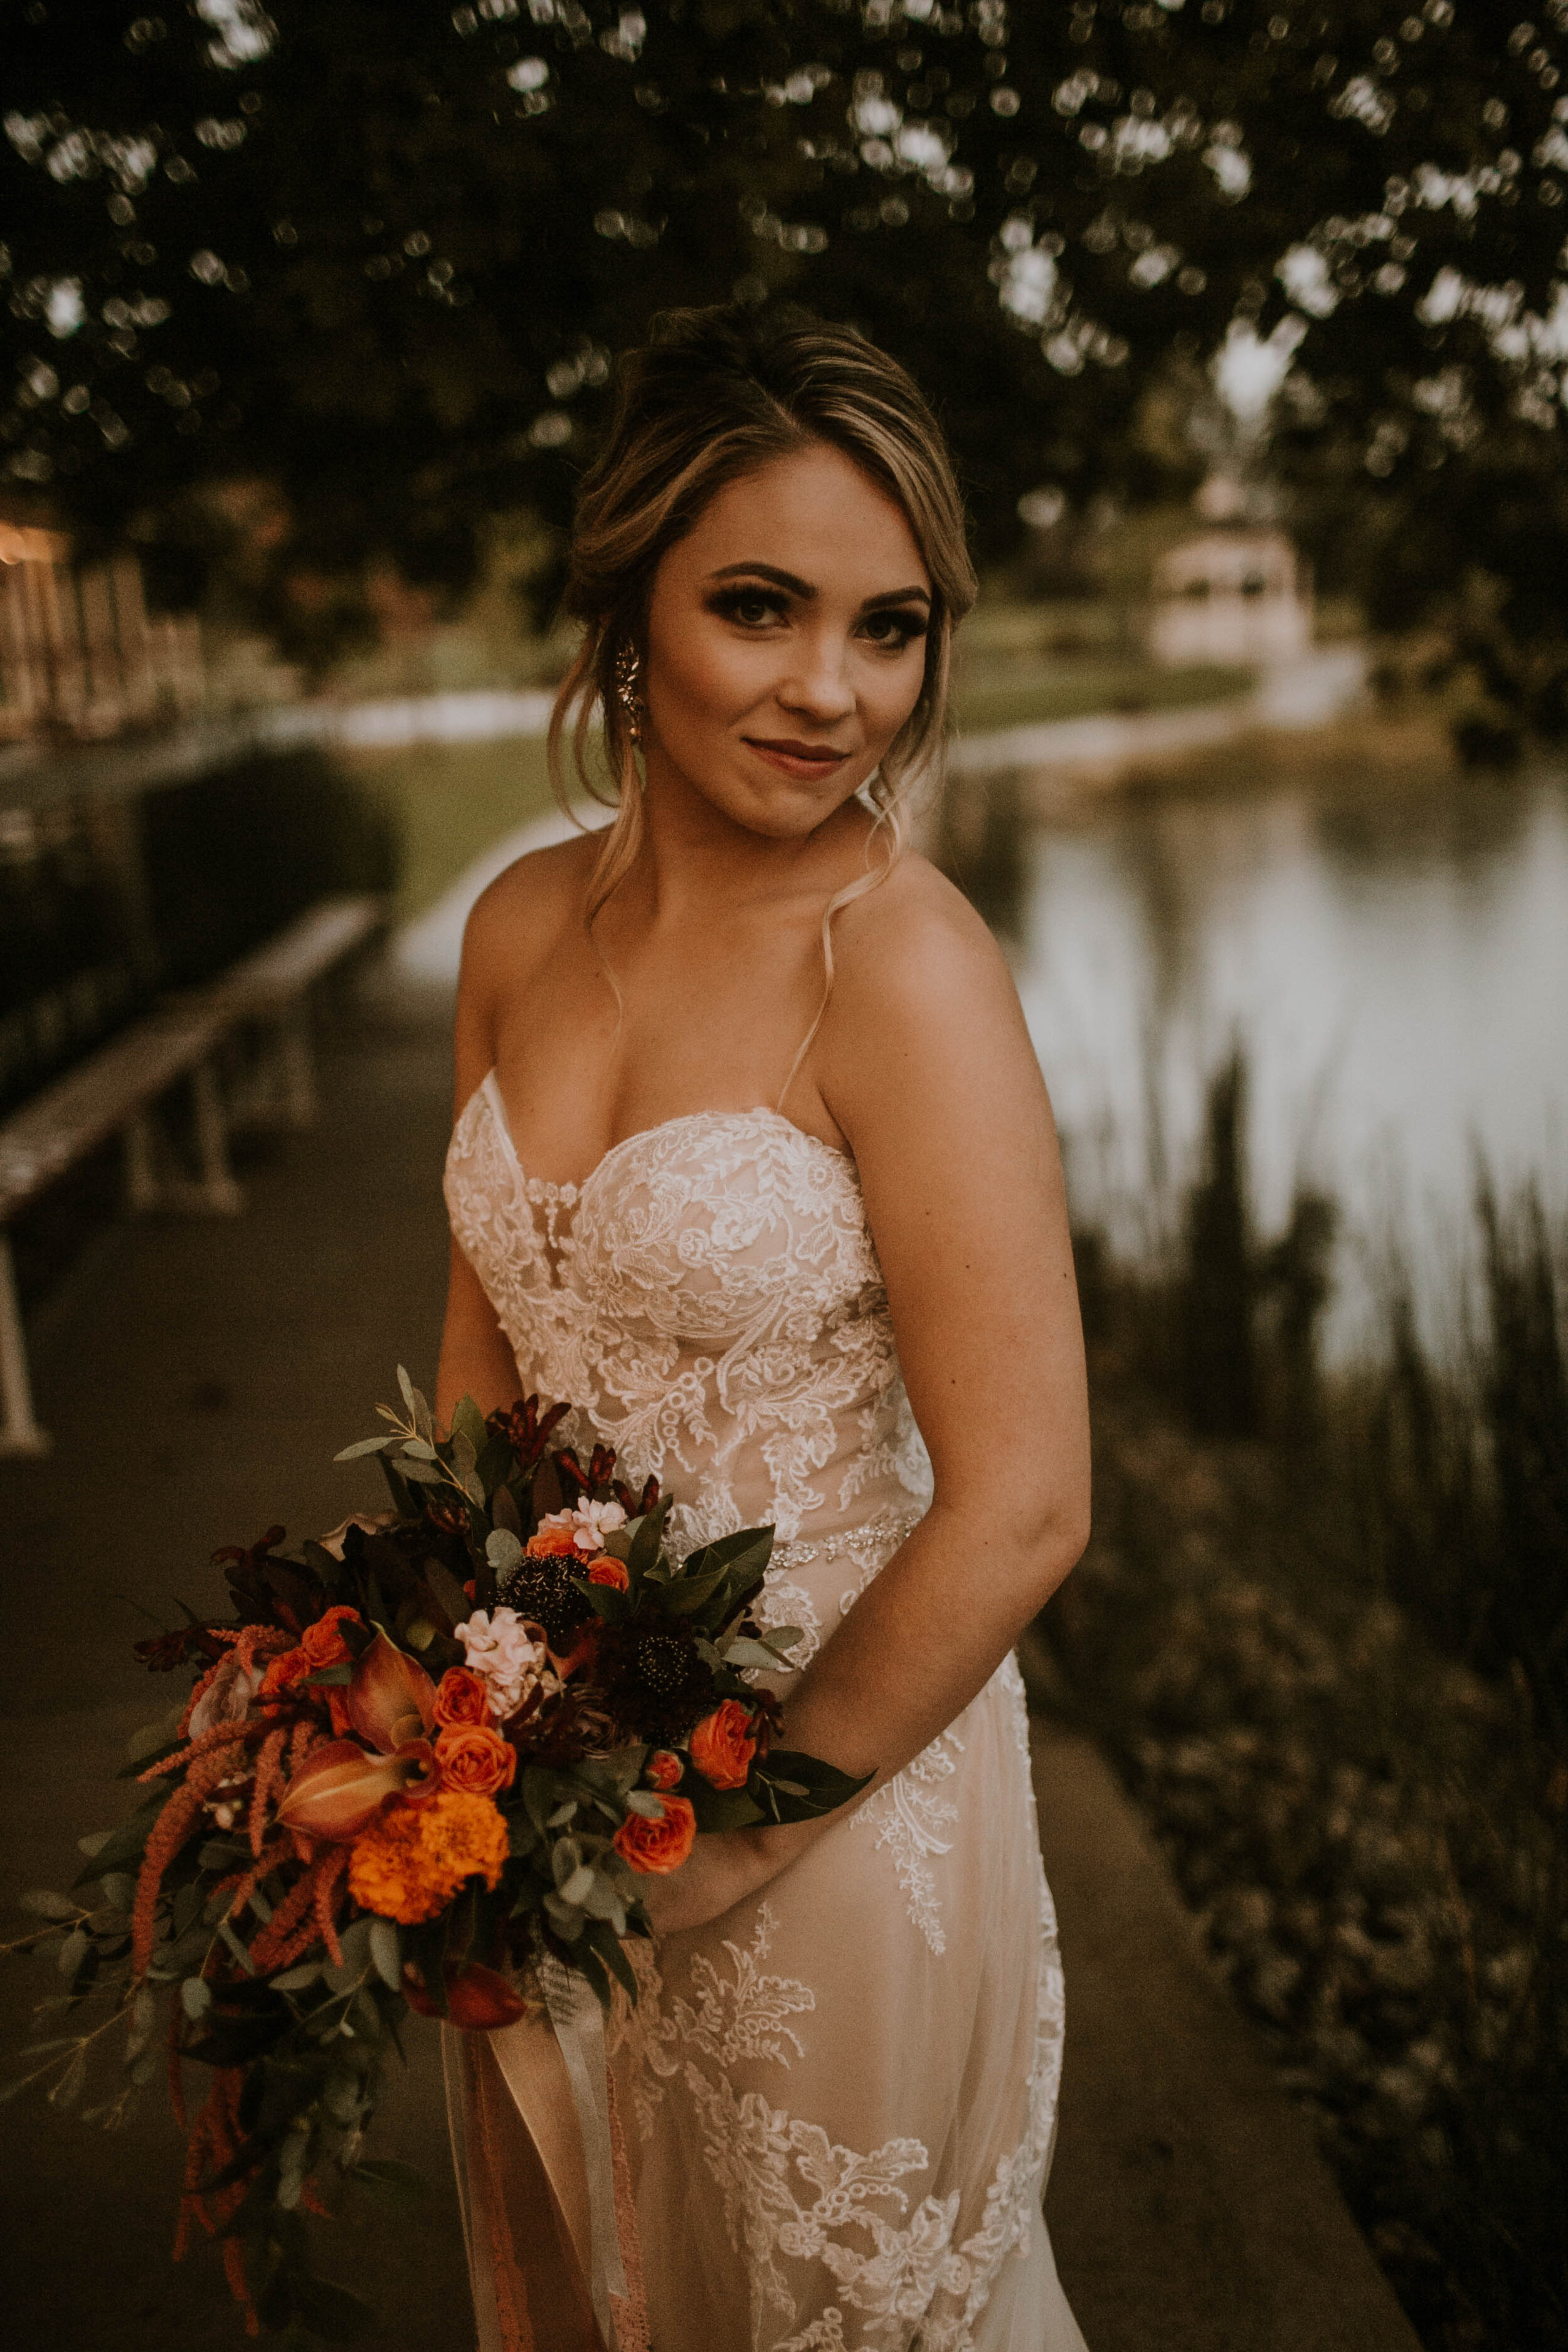 Strapless lace wedding dress: Moody Fall Wedding Styled Shoot captured by Gabrielle Daylor Photography. See more fall wedding ideas at CHItheeWED.com!